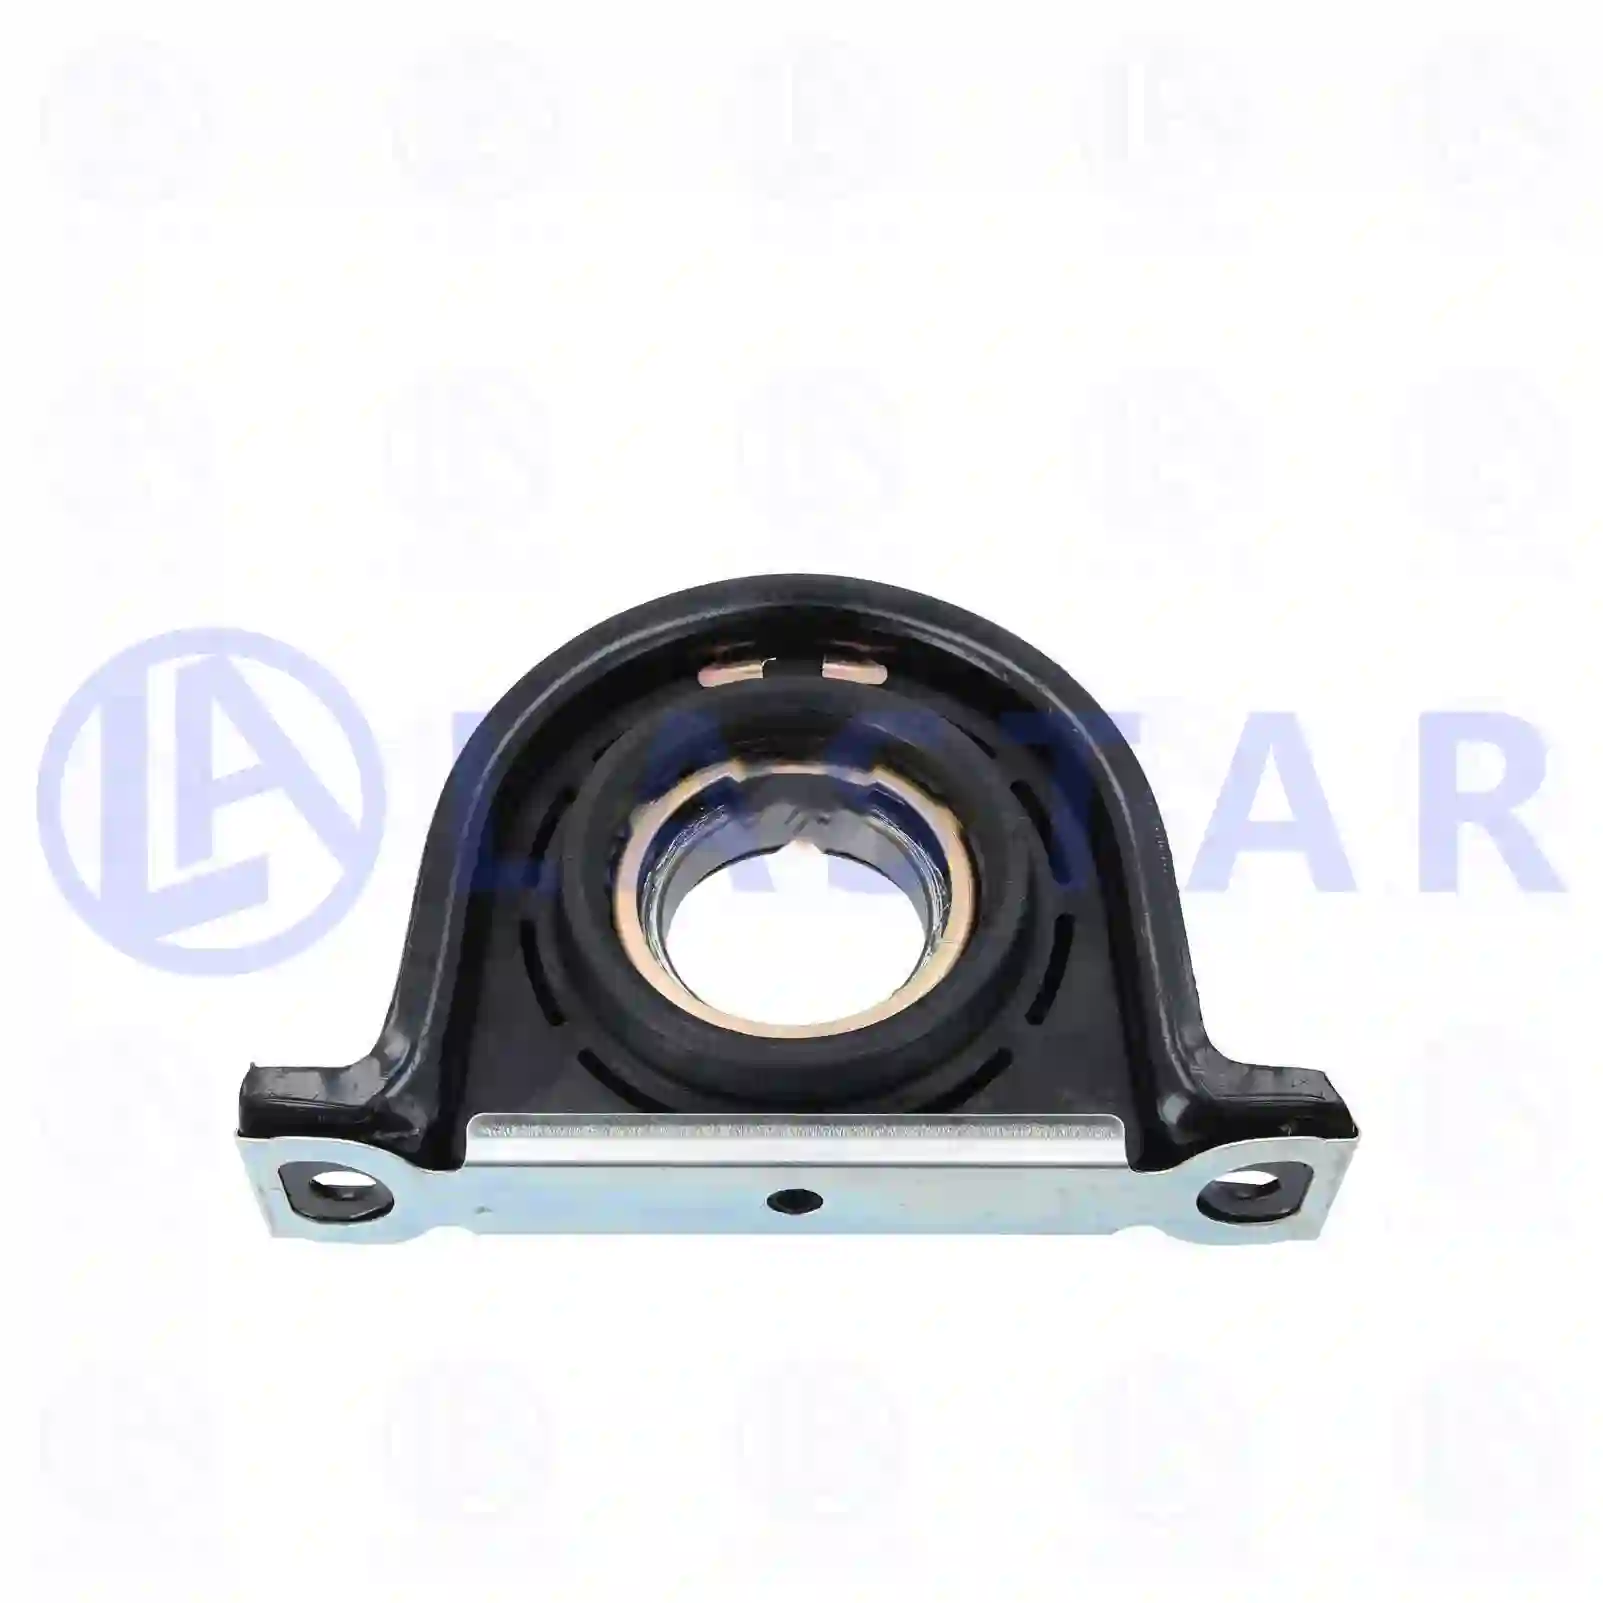 Support Bearing Center bearing, la no: 77734349 ,  oem no:42532295, 42538367, ZG02503-0008 Lastar Spare Part | Truck Spare Parts, Auotomotive Spare Parts